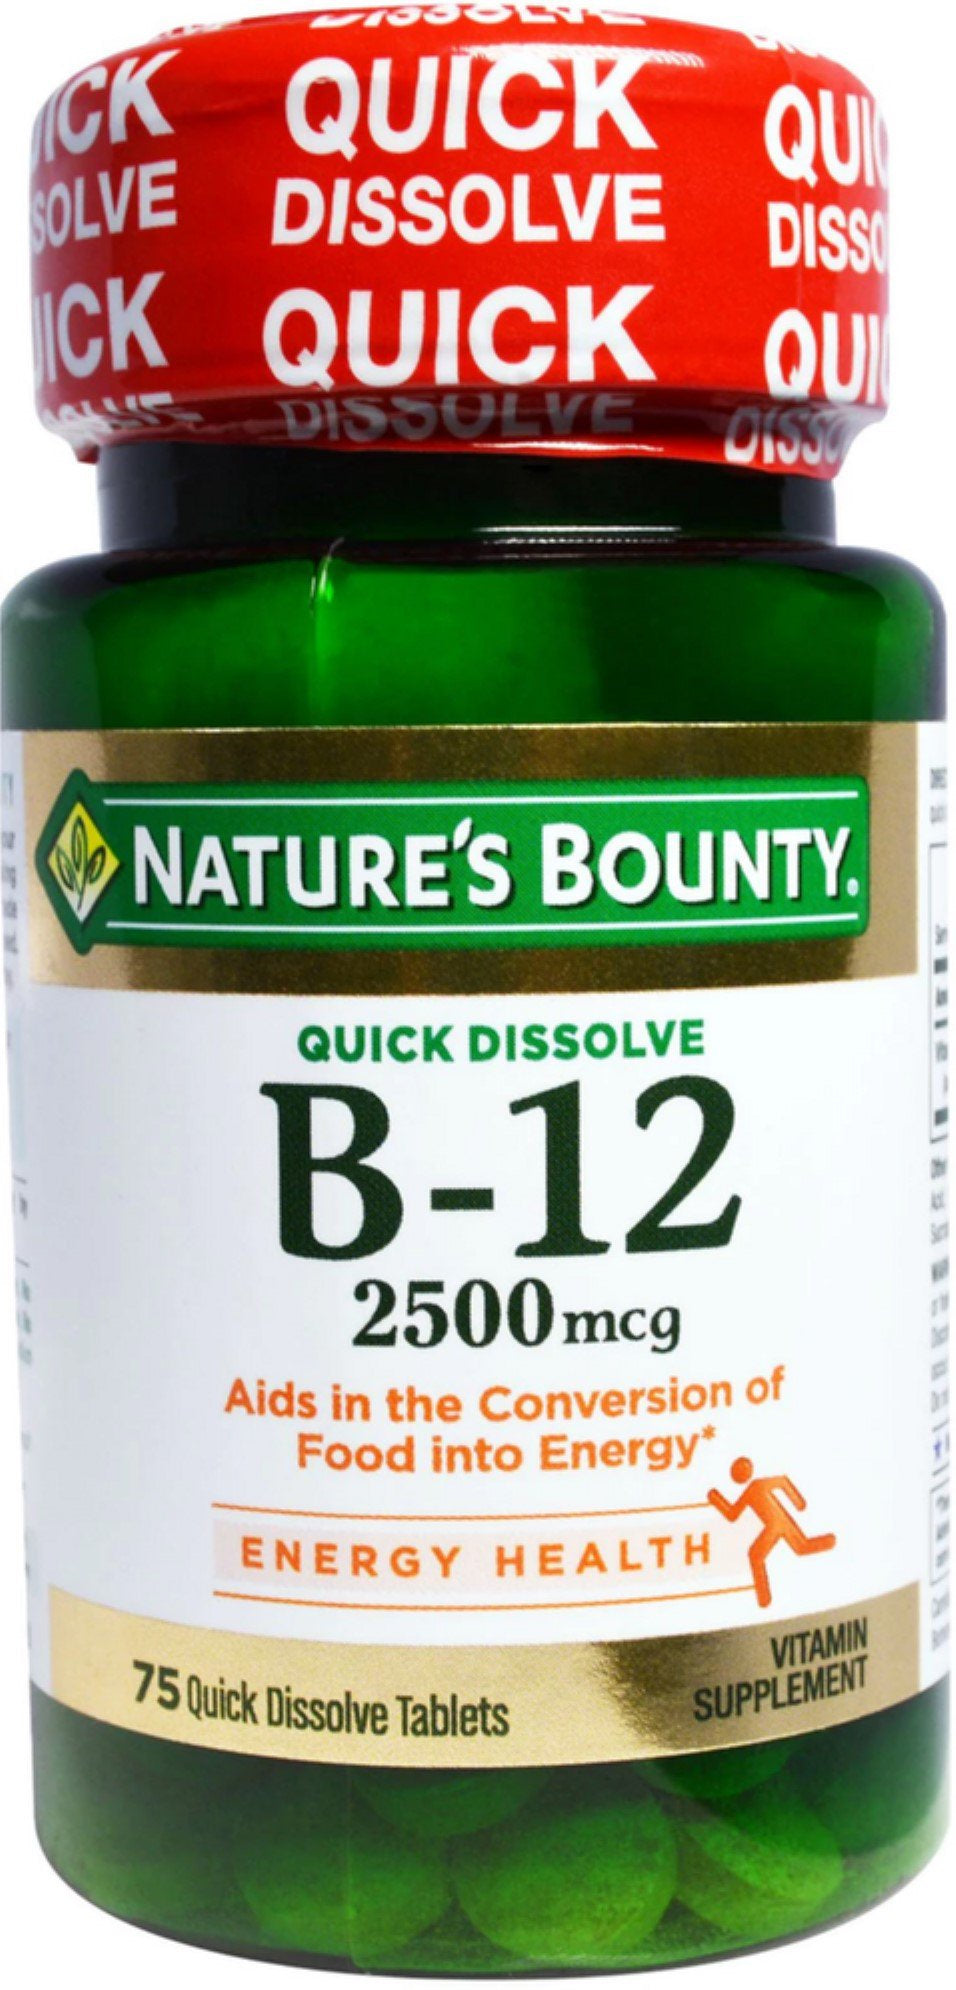 Nature'S Bounty Vitamin Quick Dissolve B-12 2500 Mcg Tablets, 75 Ea (Pack of 2)